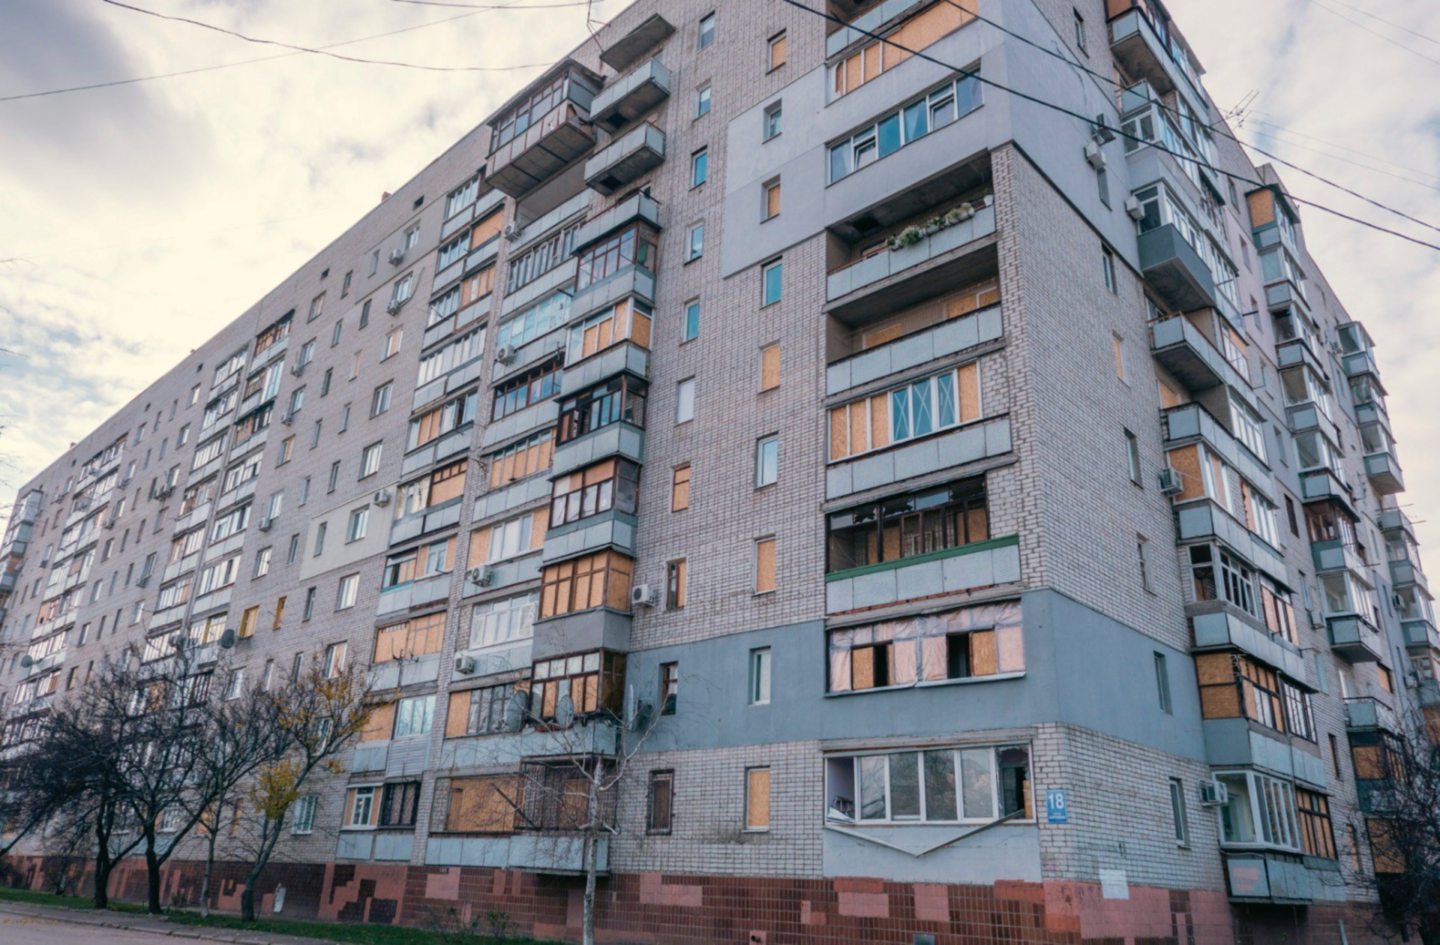 Windows are boarded up in the tower block where the Kotlyarovs will spend Christmas